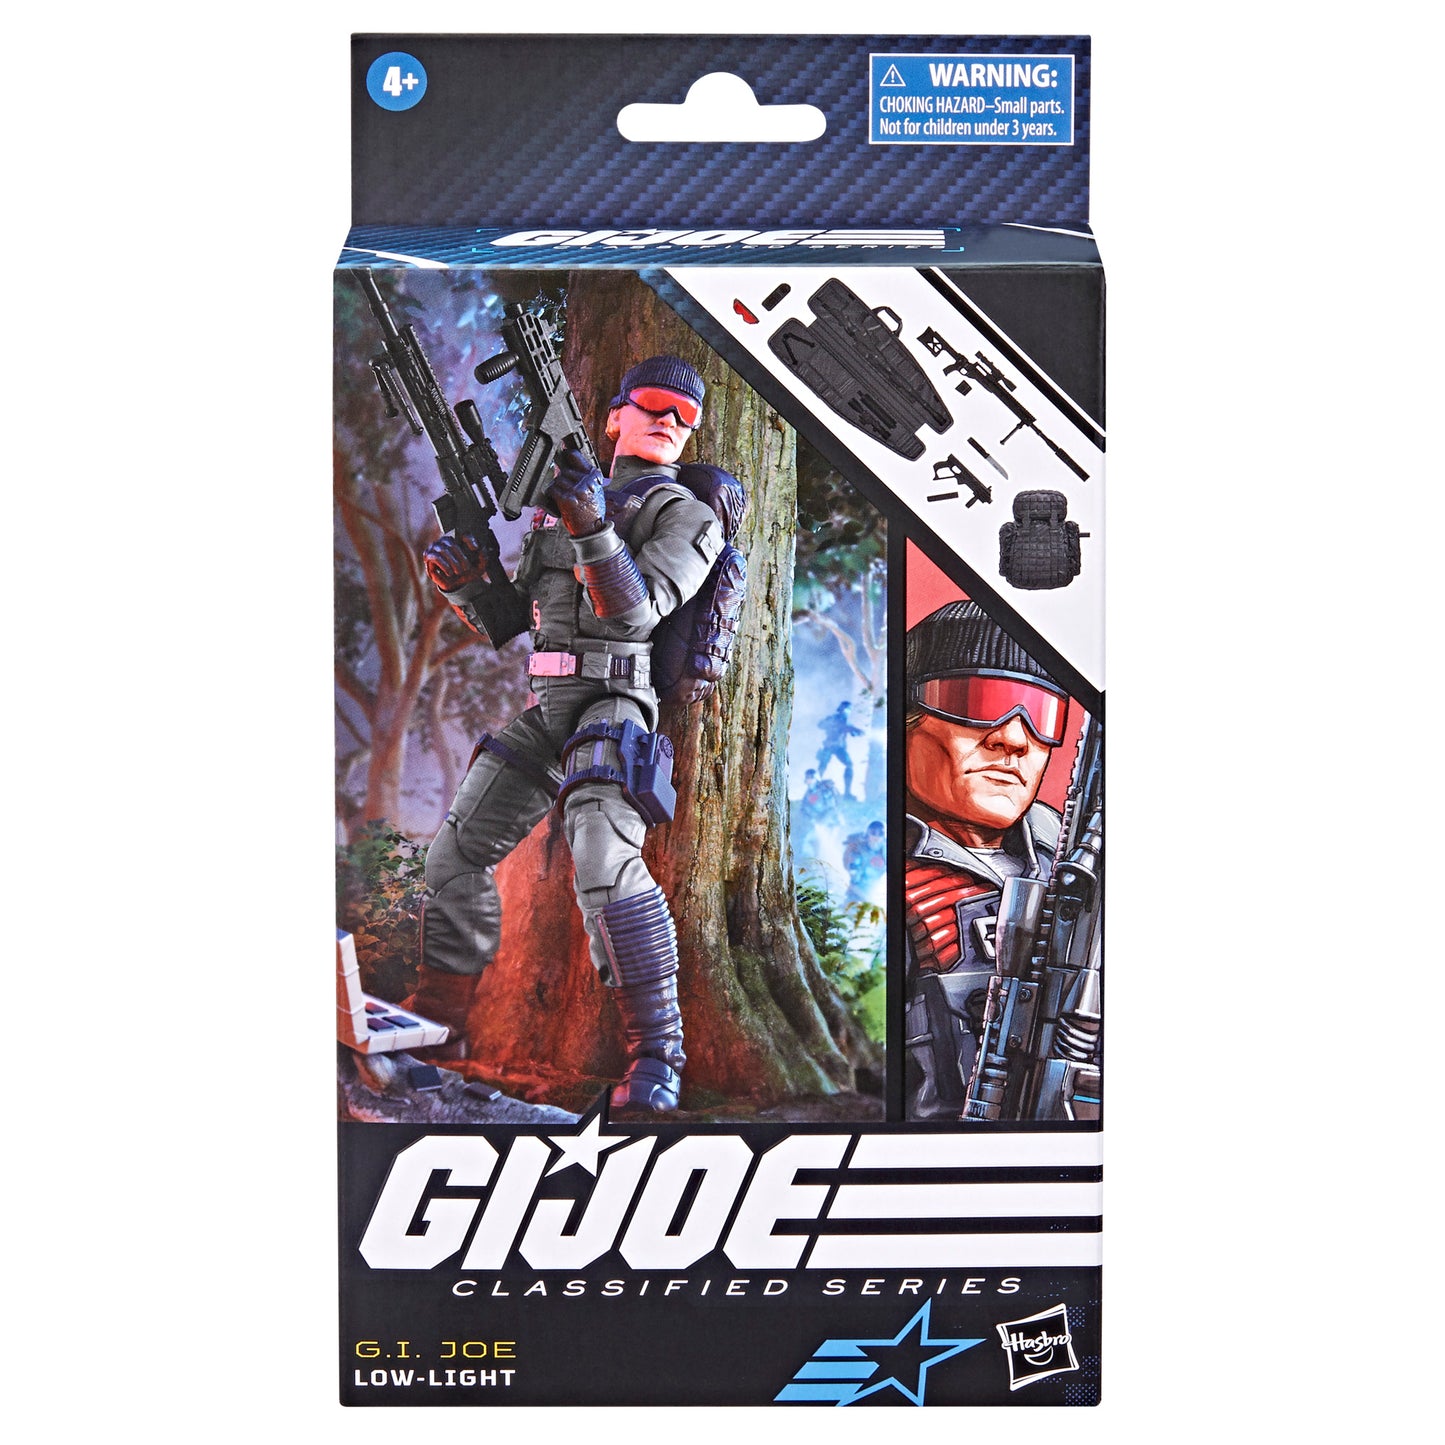 G.I. Joe Classified Series Low-Light, 86 Action Figure Toy front view 